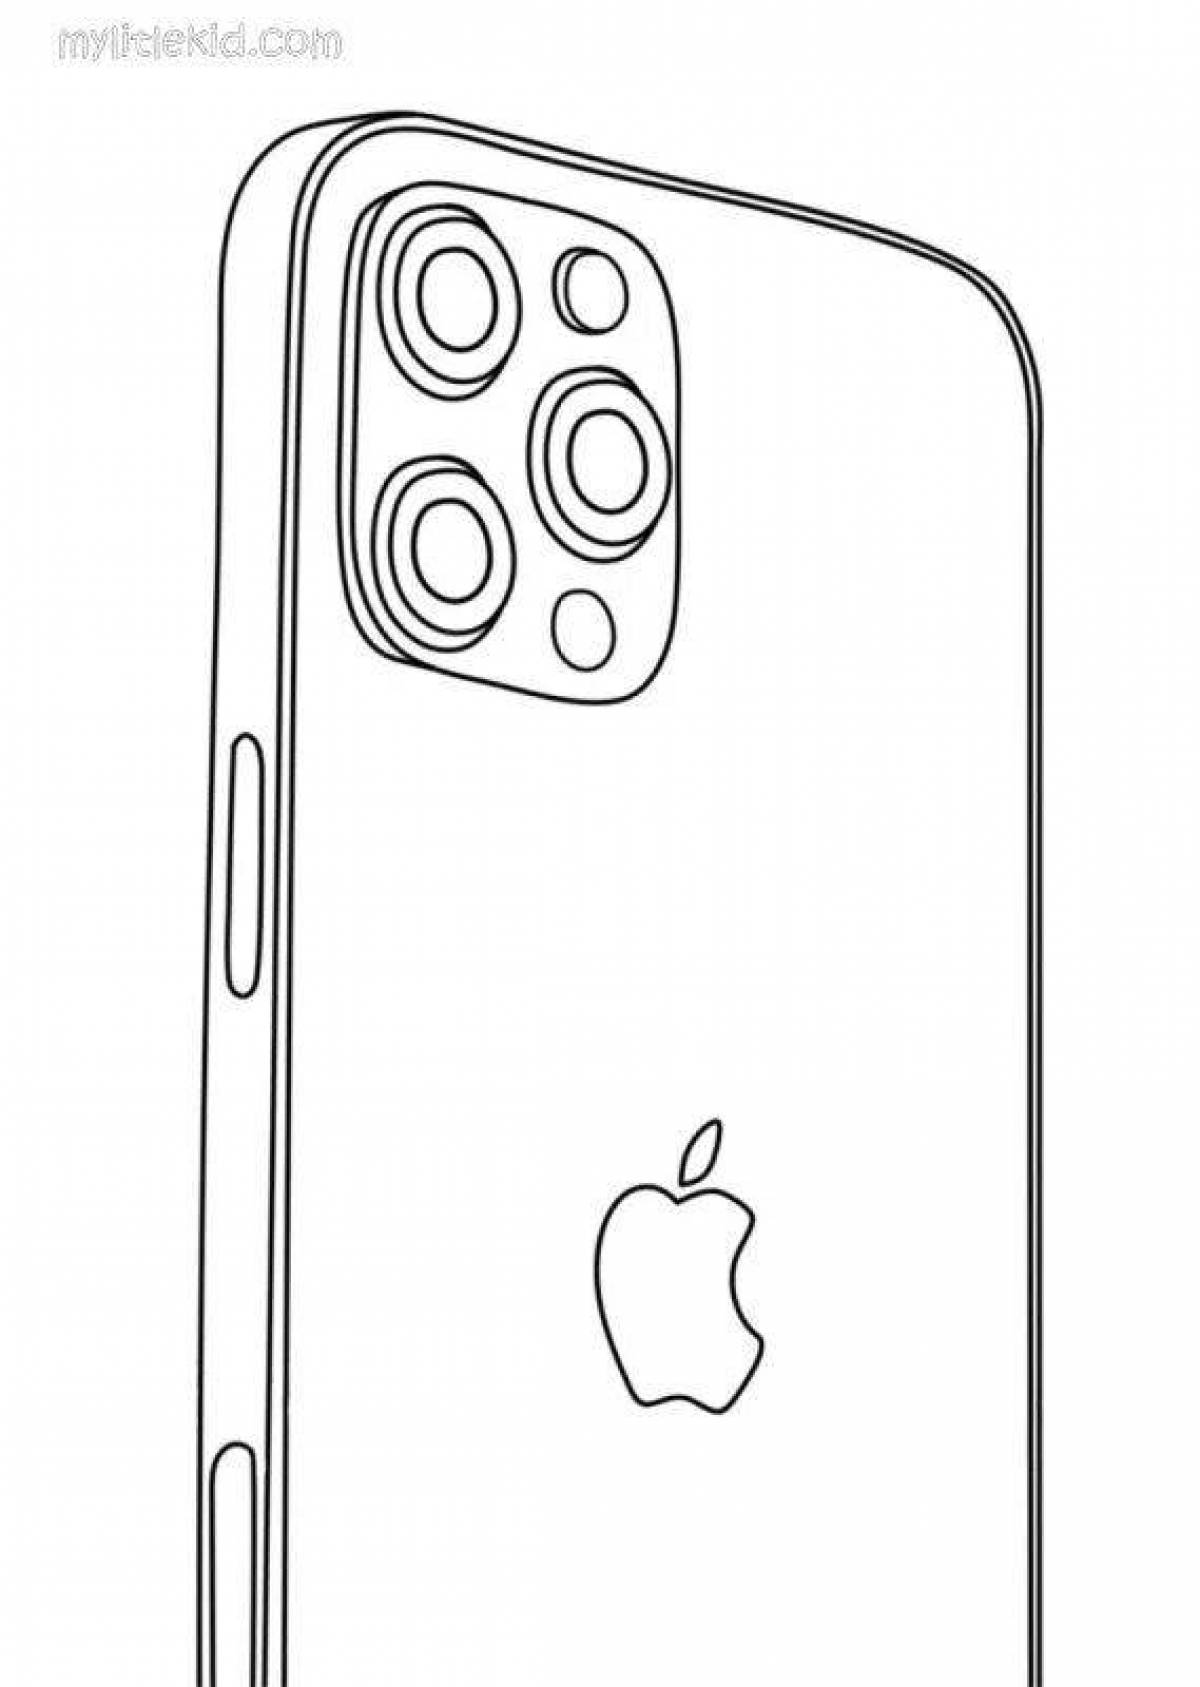 Playful iphone coloring page